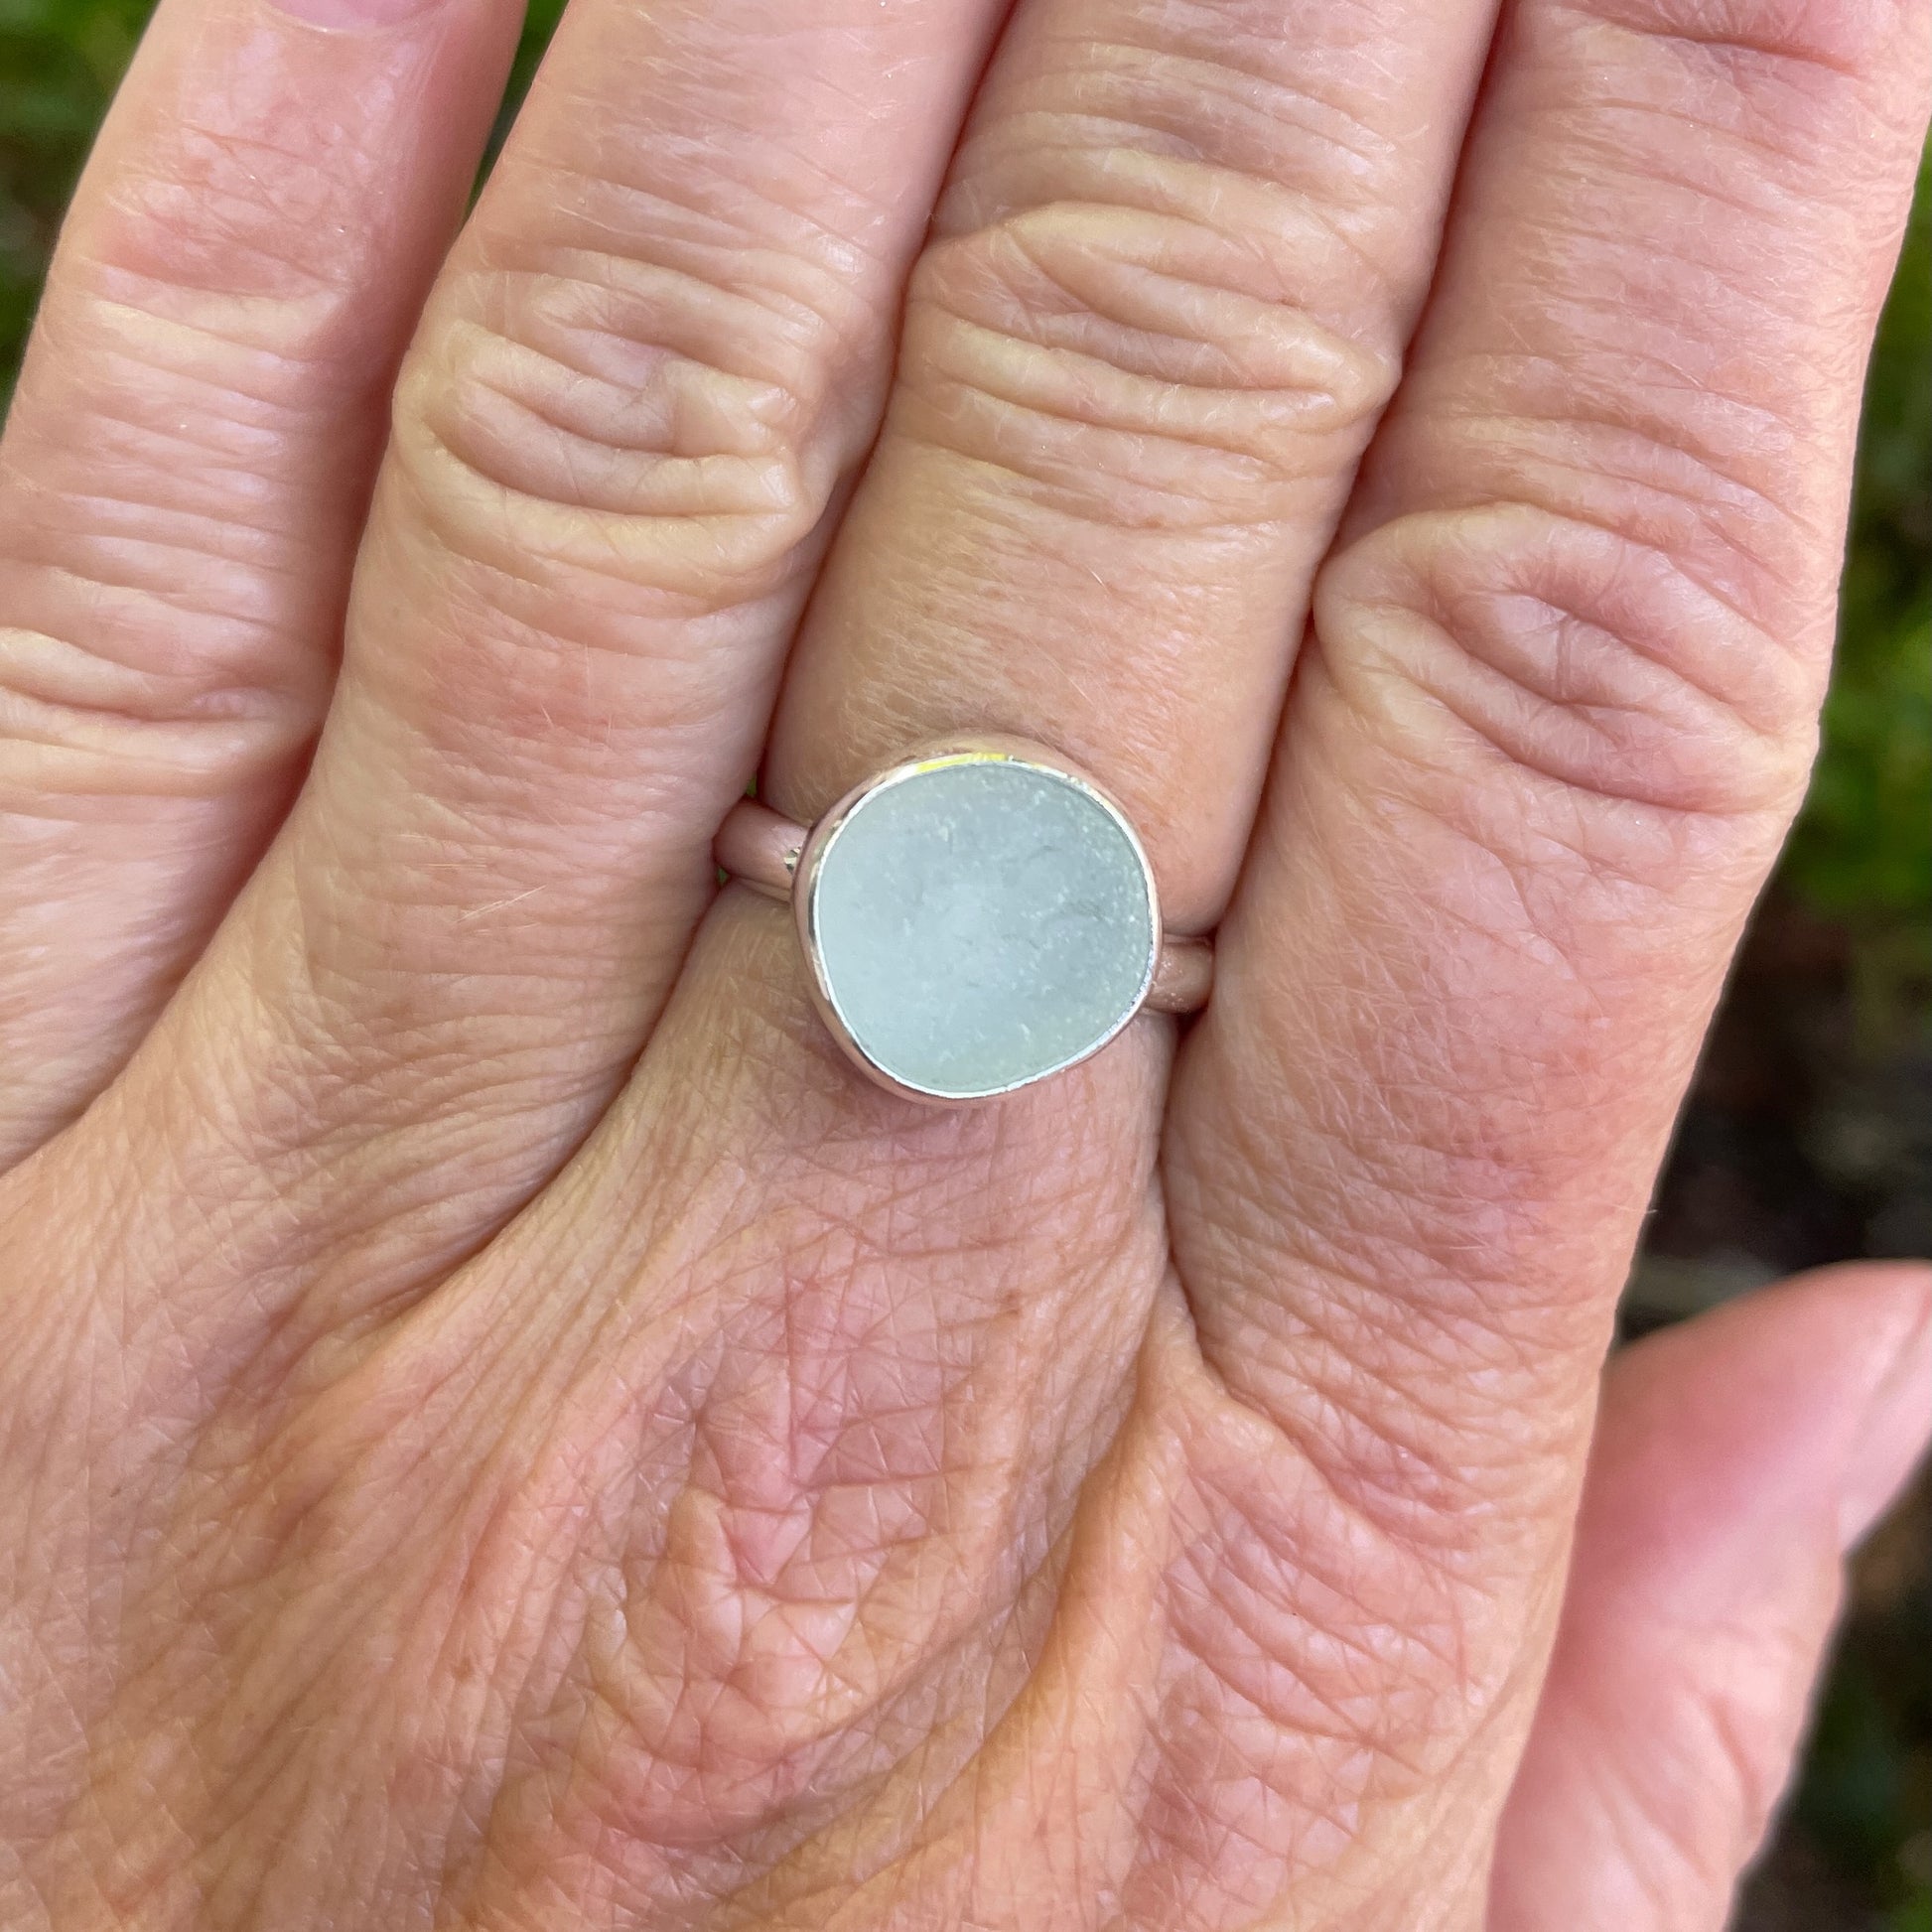 This is a chunky round piece of white sea glass set in a fine and sterling silver bezel setting with a hammered silver band.  Size 8 1/4 modeled on a hand